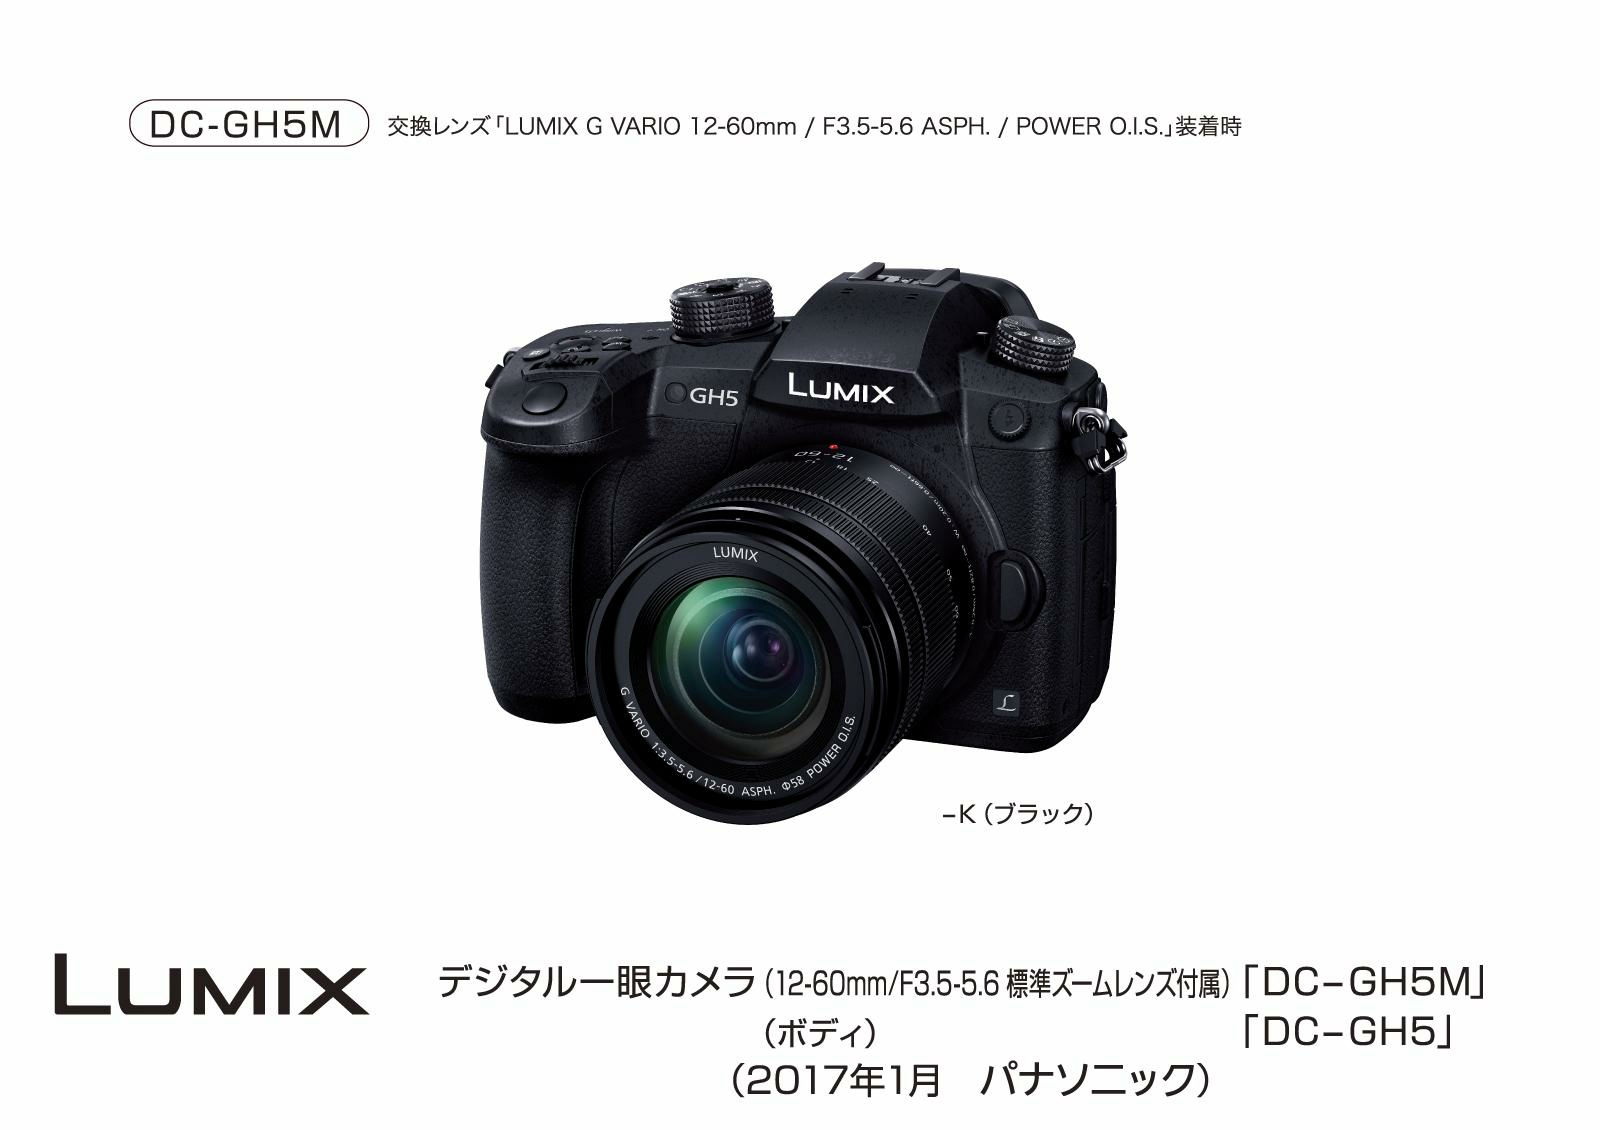 instant Wees tevreden petticoat Panasonic announces the world's first high-end mirrorless "LUMIX DC-GH 5"  capable of shooting 4K 60p movies - GIGAZINE